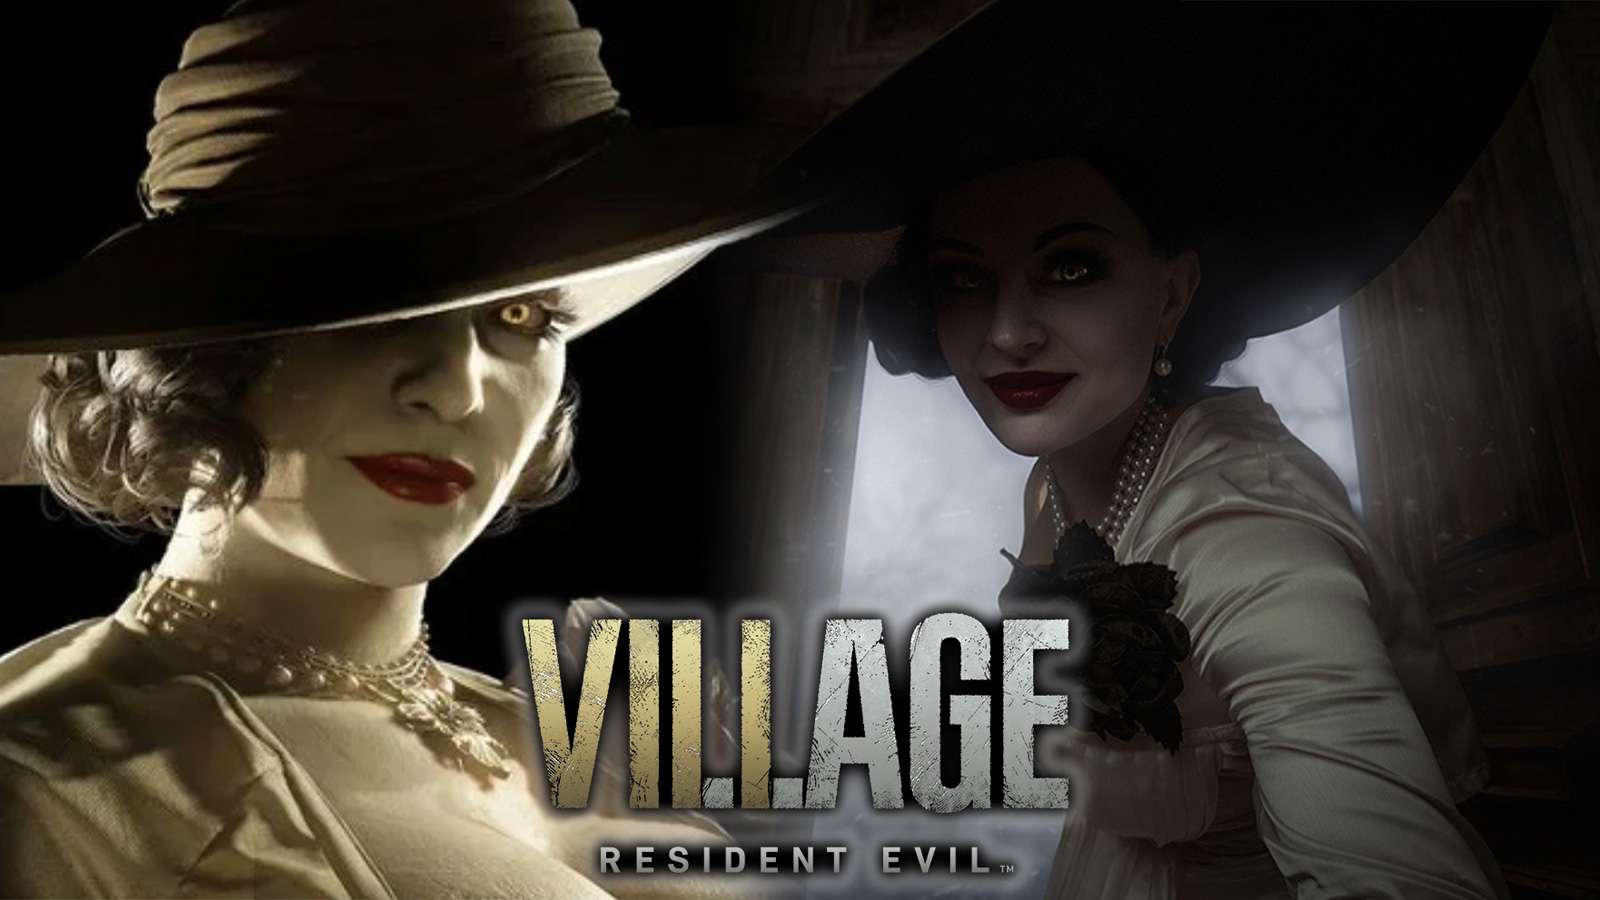 Screenshot of tall vampire lady from Resident Evil Village next to cosplayer.